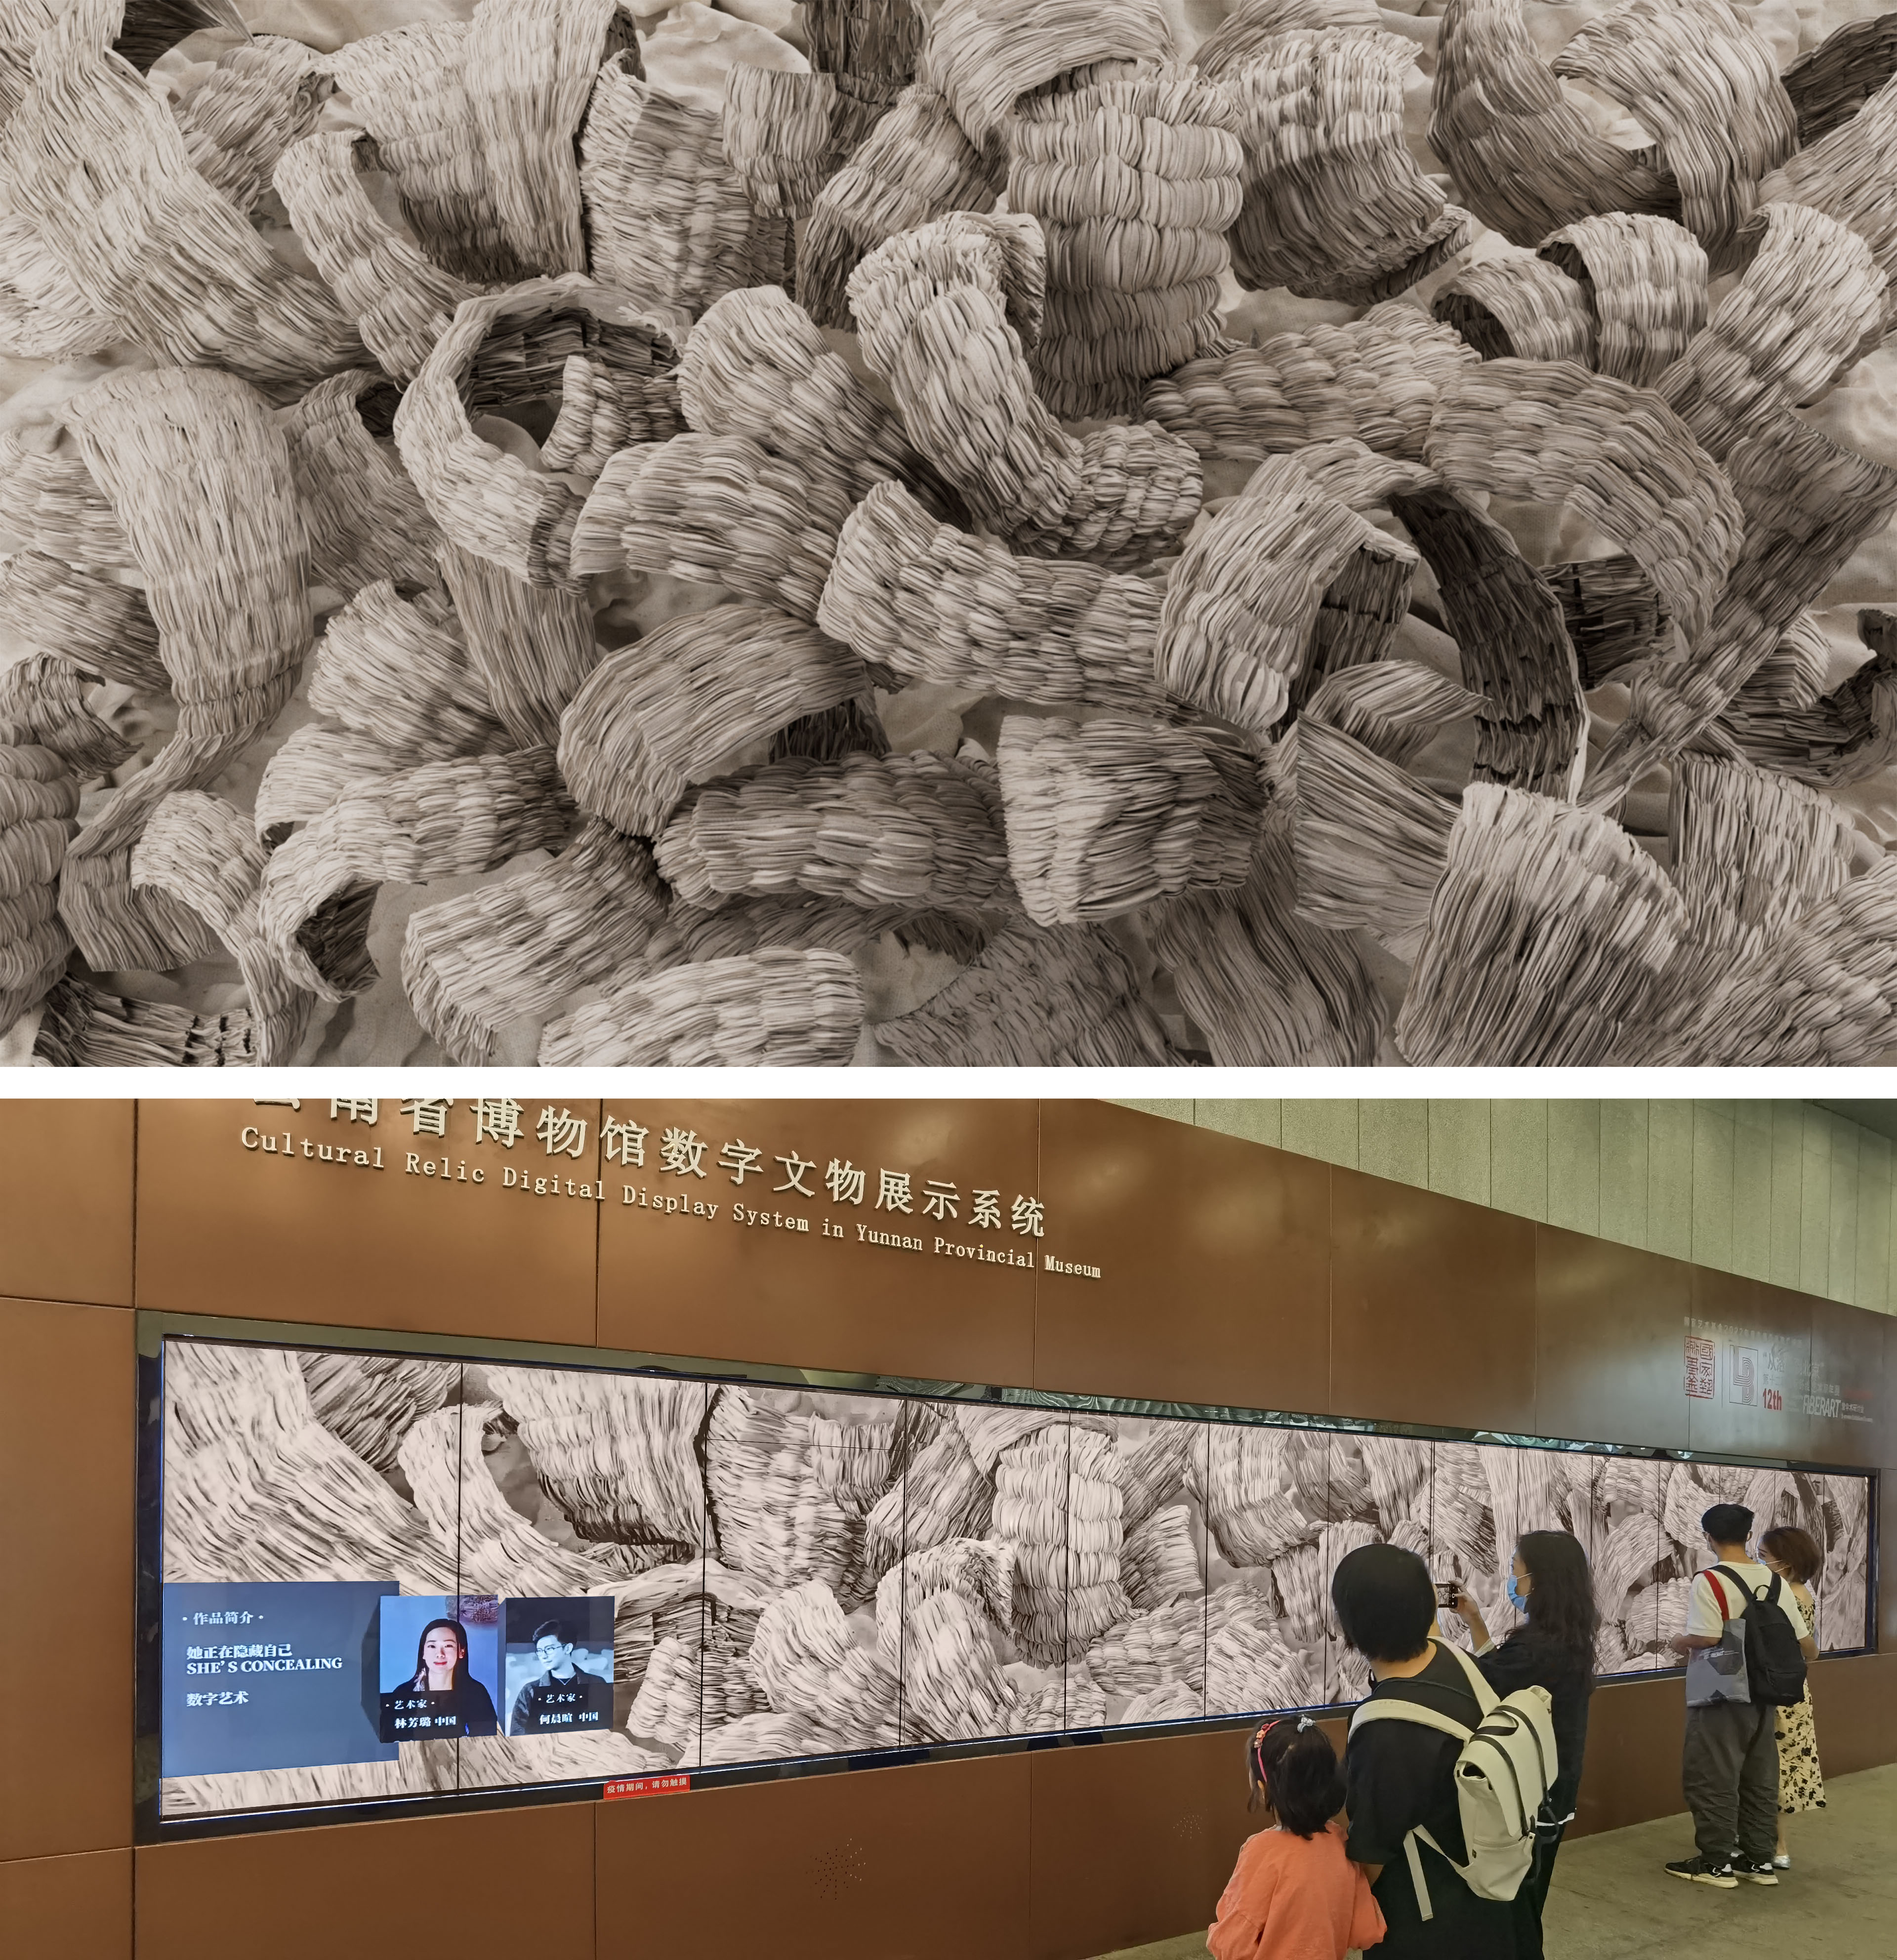 A phygital fabrication to disassemble and reassemble the existing material, which challenges the fabrication workflow and standard—displayed in Yunnan Provincial Museum. Credit to Nero He